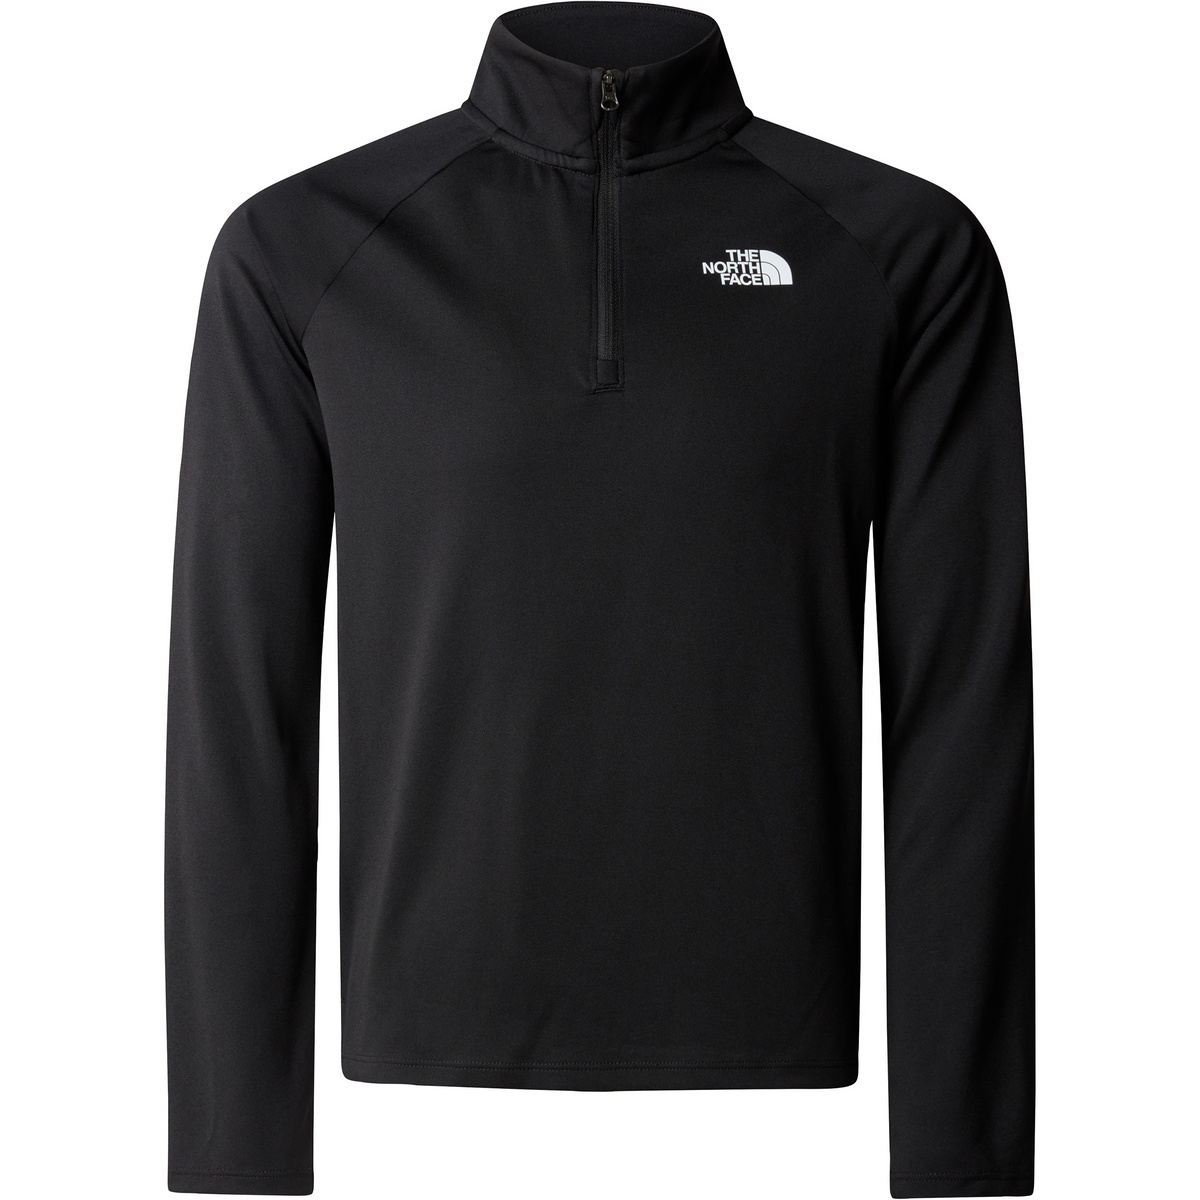 Image of The North Face Bambino Maglia a manica lunga 1/4 zip Never Stop